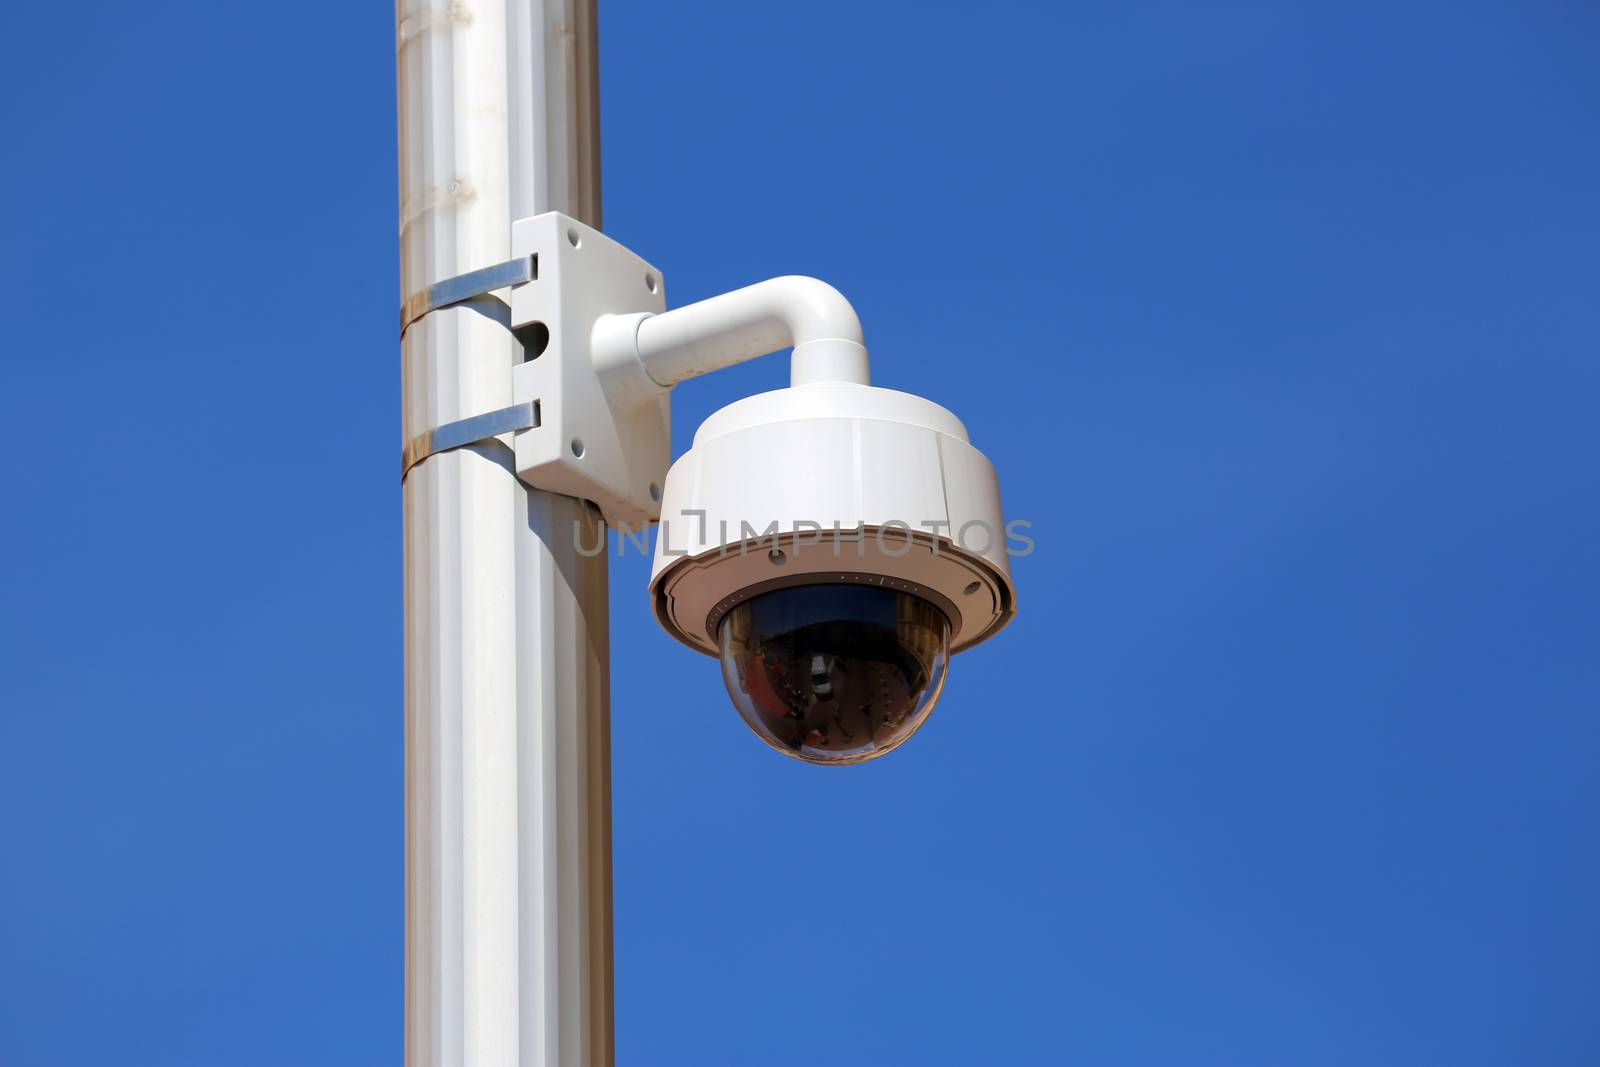 Dome Type Outdoor CCTV Camera on Street Lamp in Nice, France
